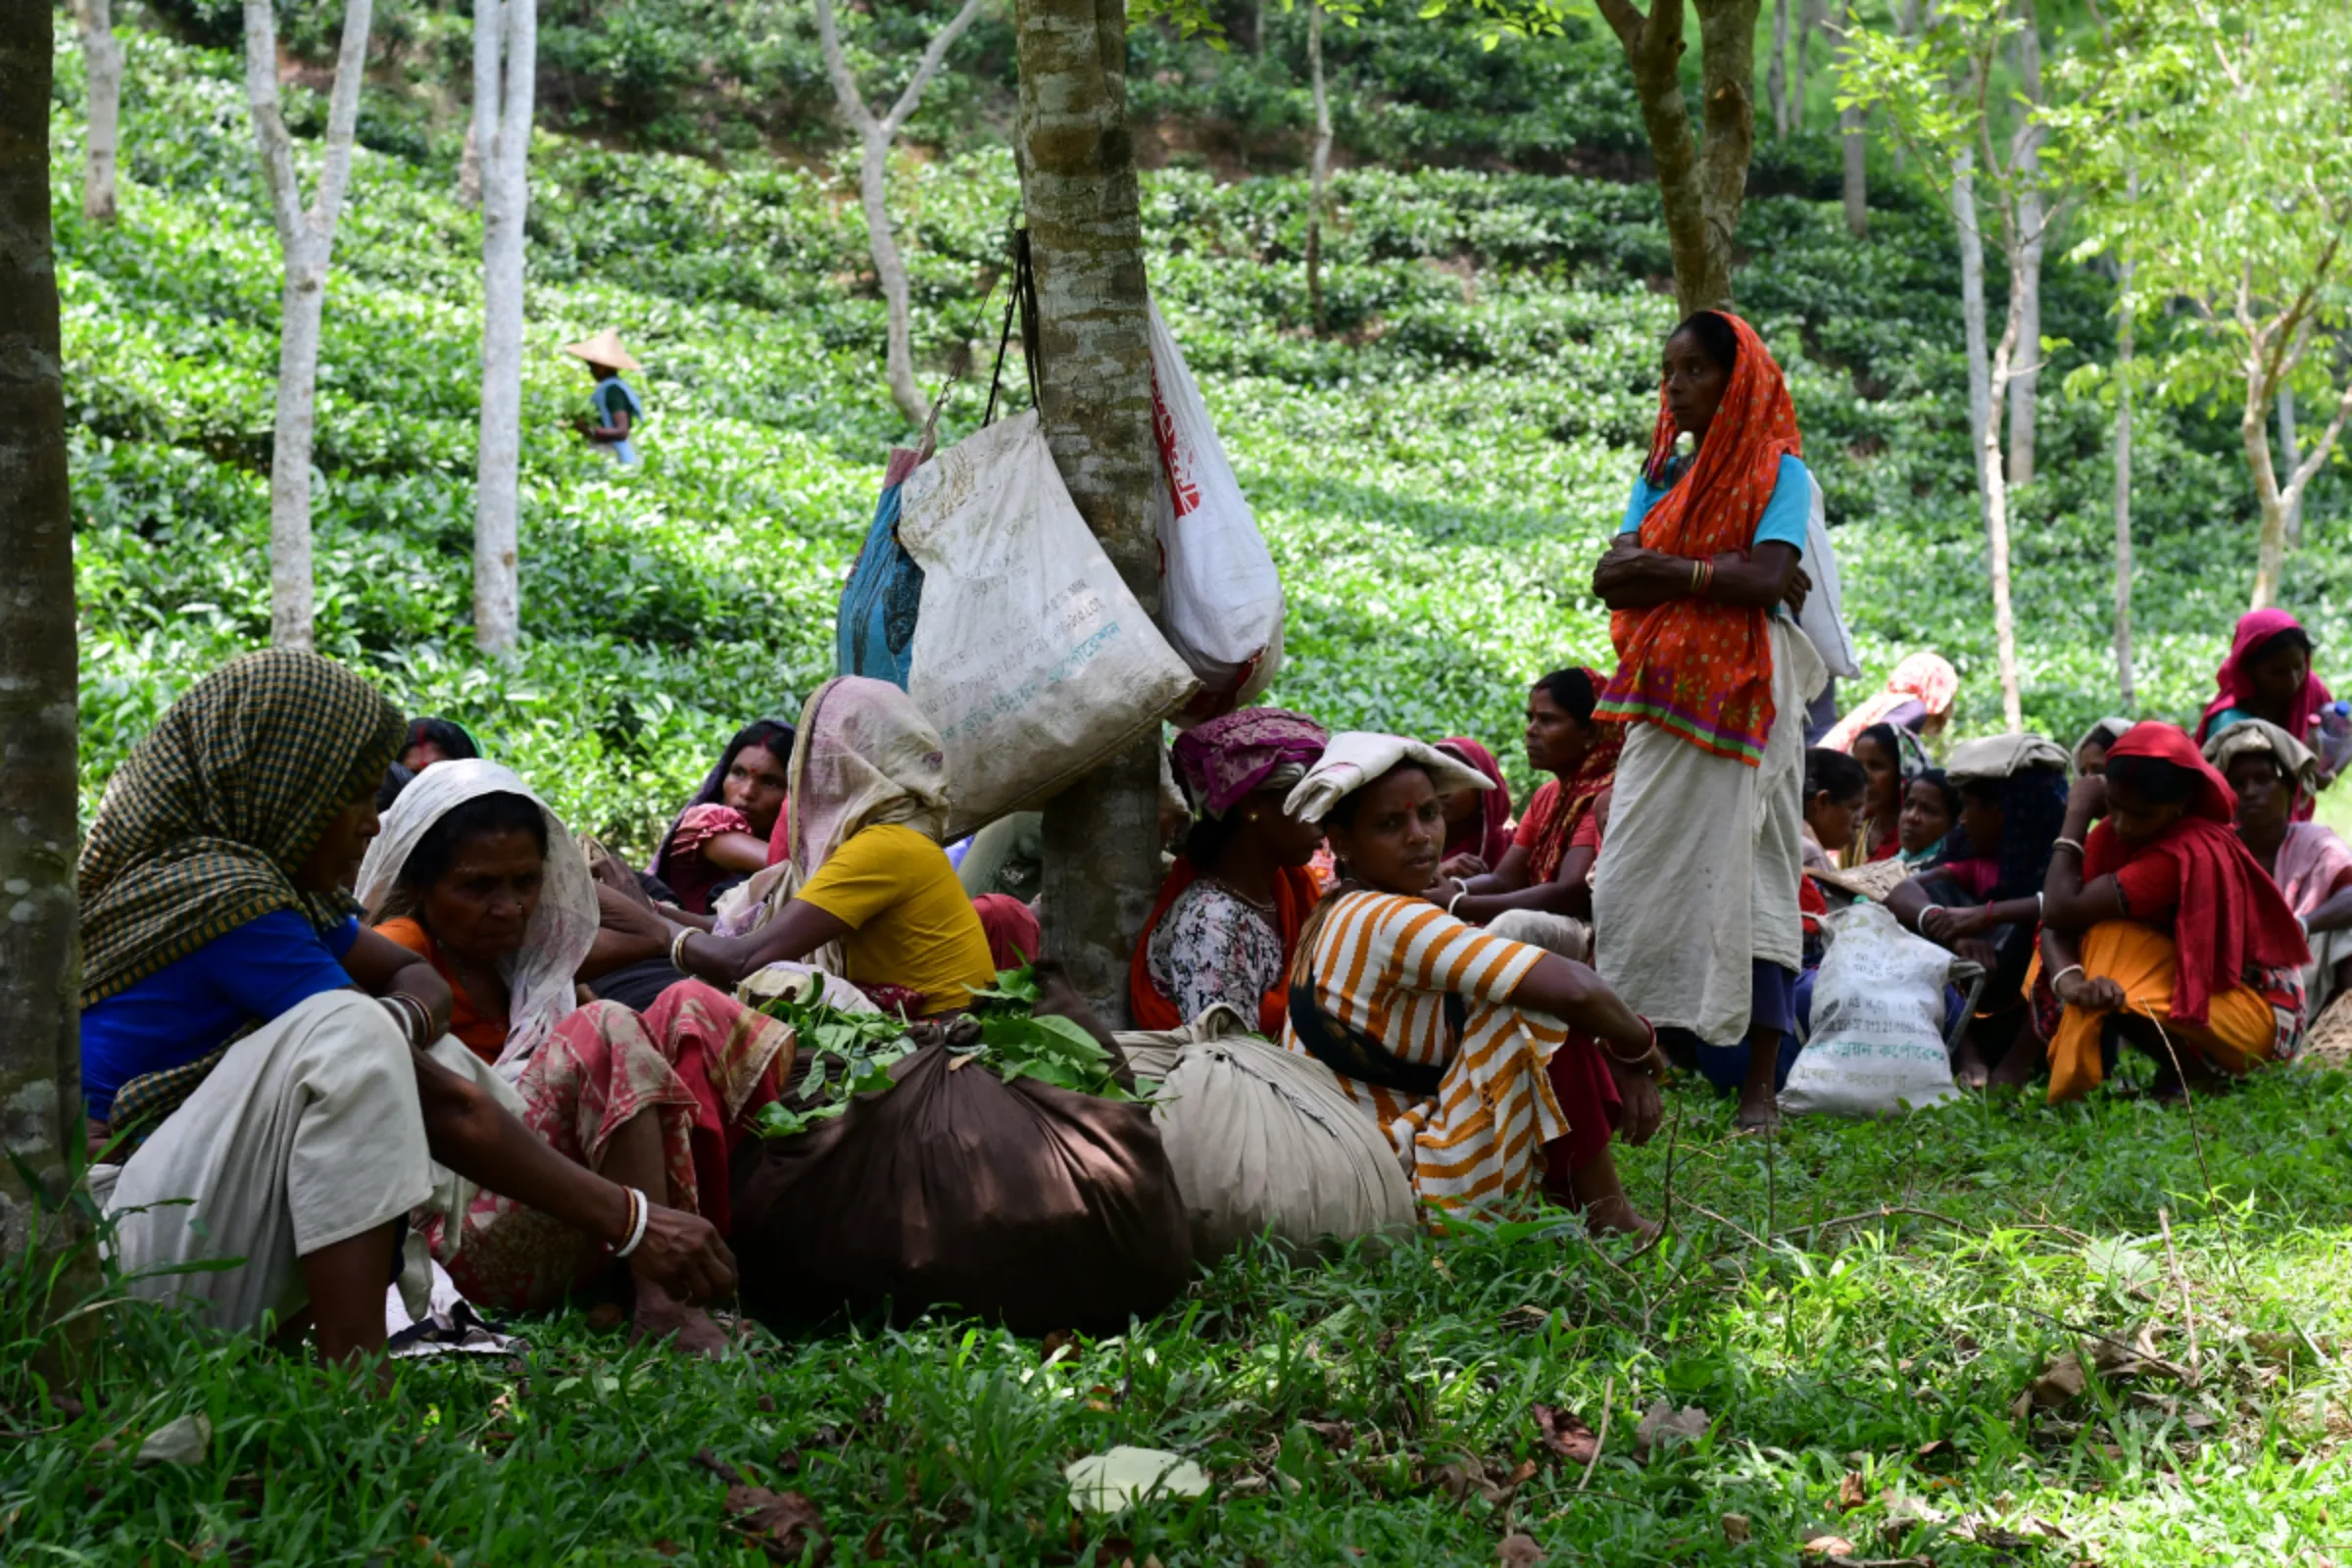 Workers rest in the shade of trees during a hot day at Barawura, a tea estate in Sreemangal, in northeastern Bangladesh, May 29, 2023